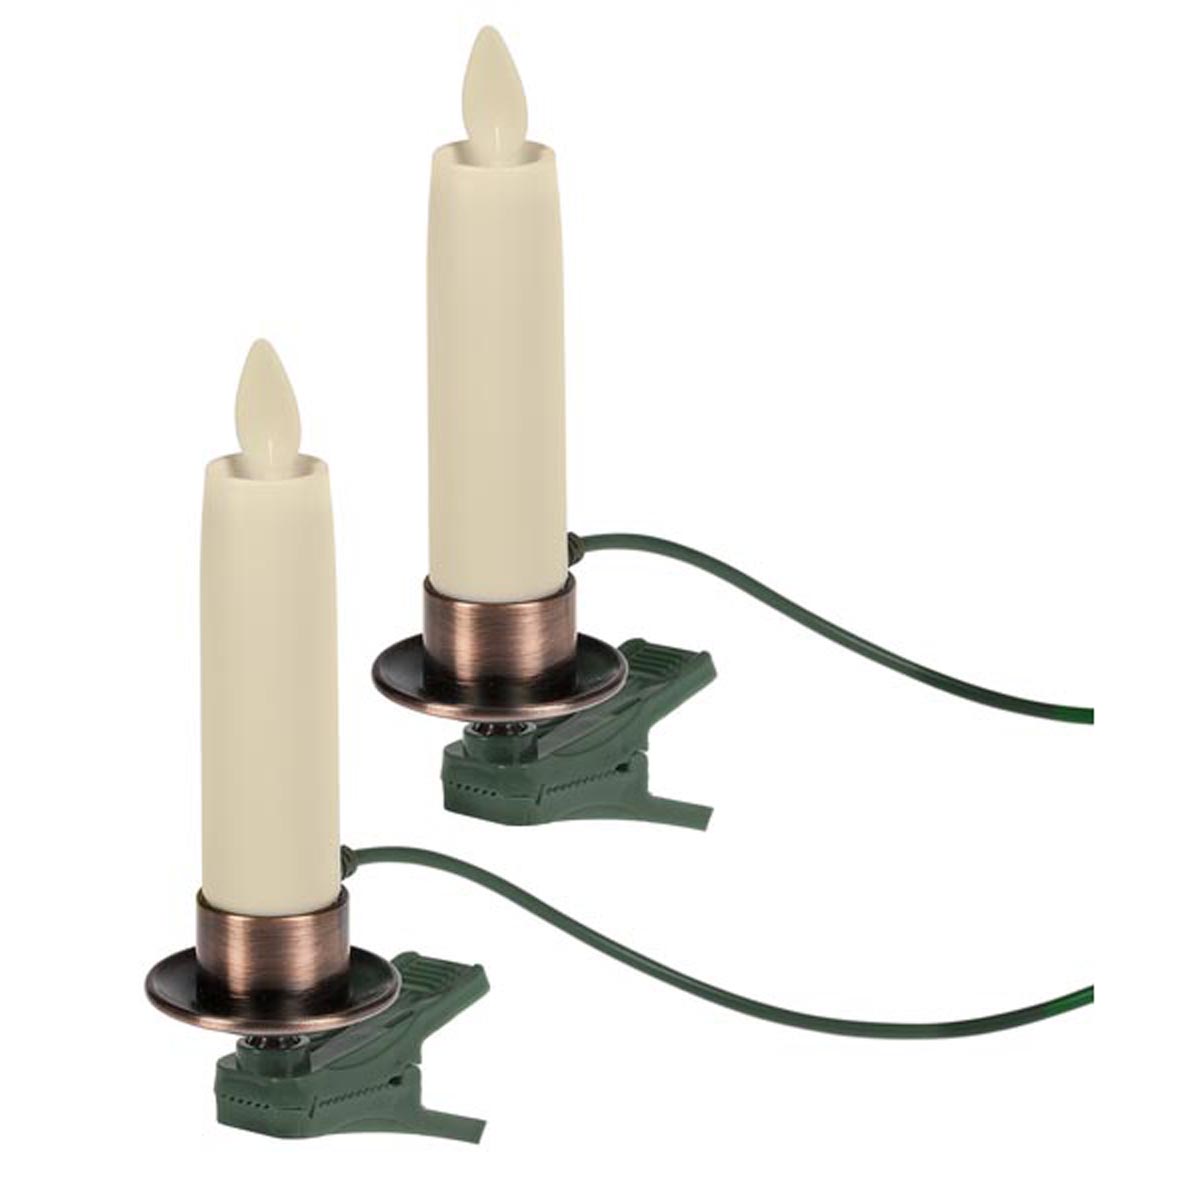 LED Clip Taper Ornaments w/ USB Connecting Cord & AC Power Adapter (2 pc. set)